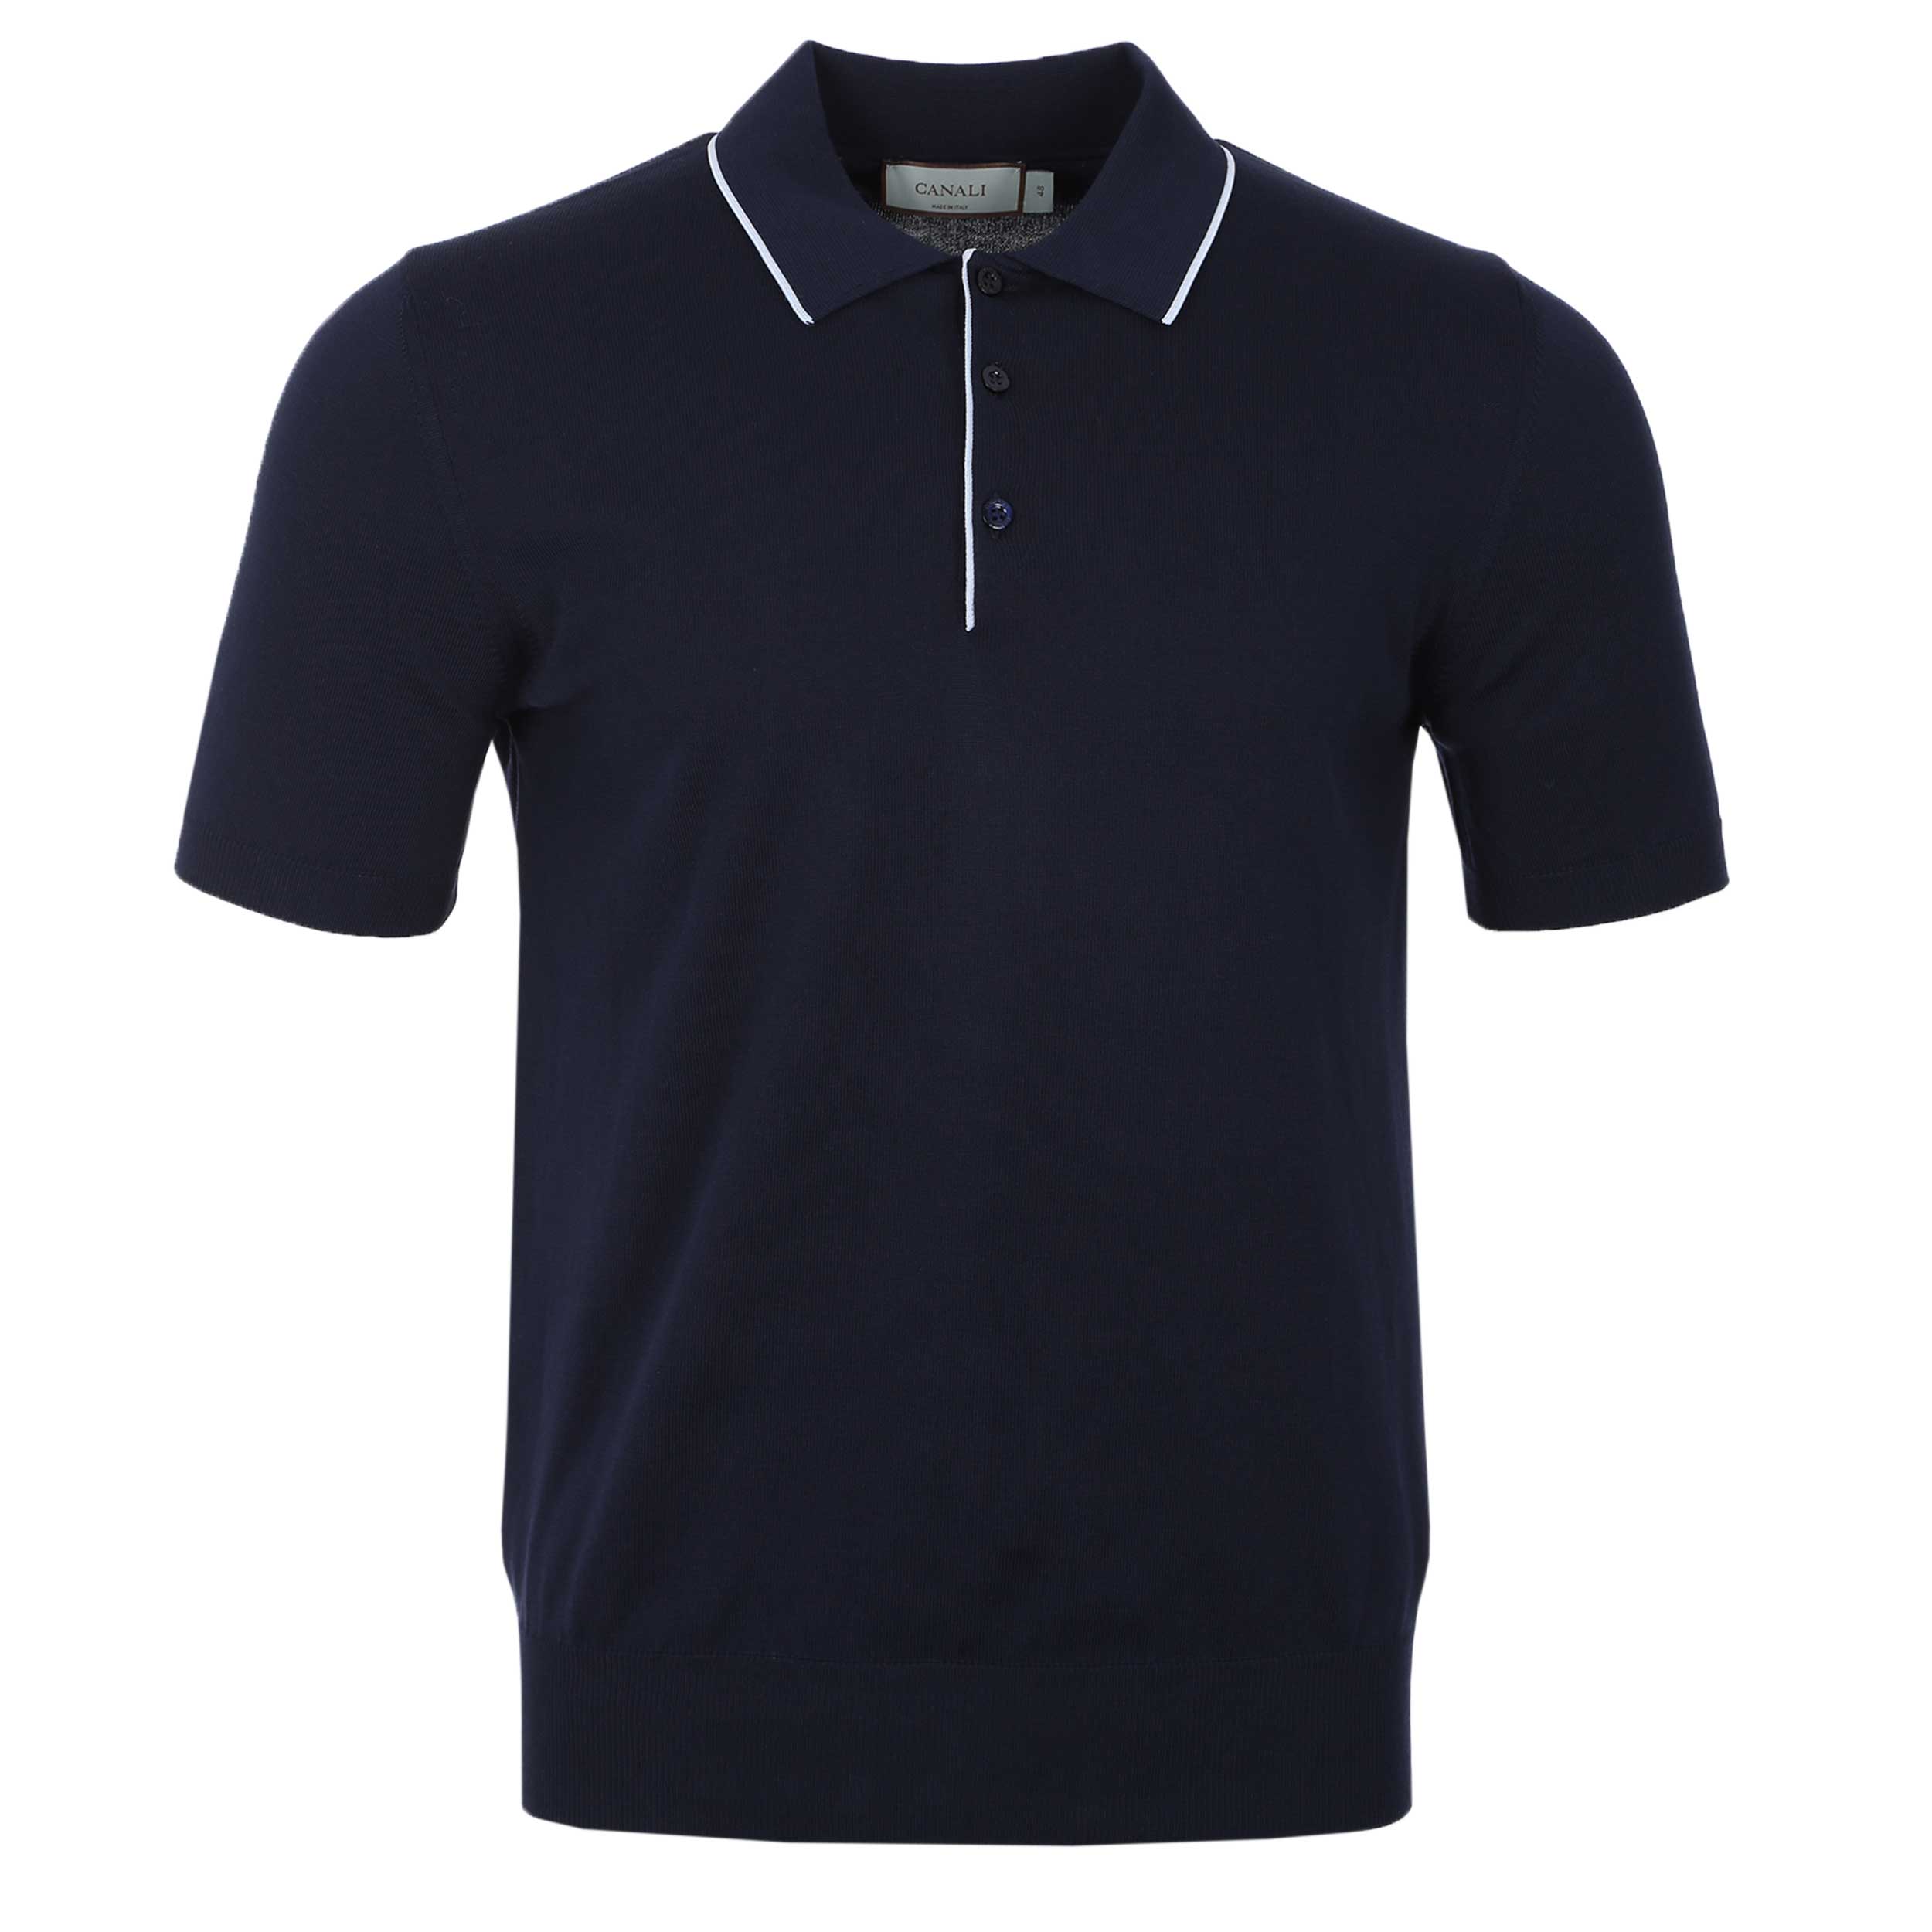 Canali 3 Button Knitted Polo in Navy